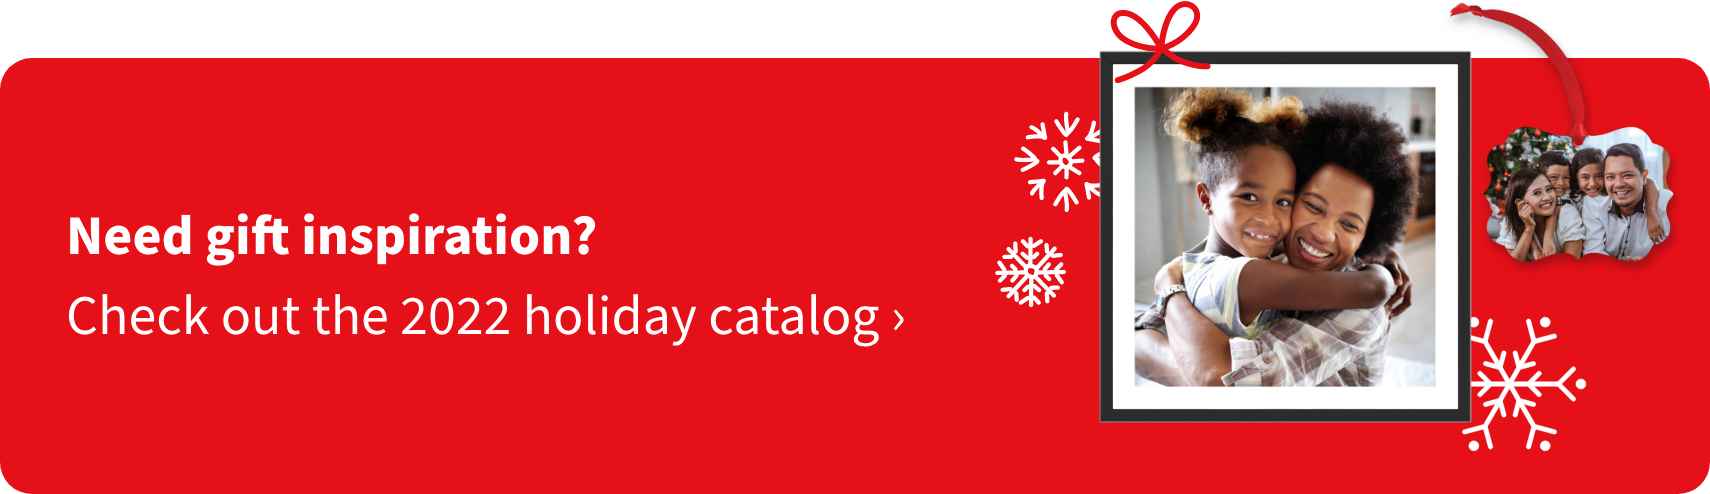 Need gift inspiration? Check out the 2022 holiday catalog.